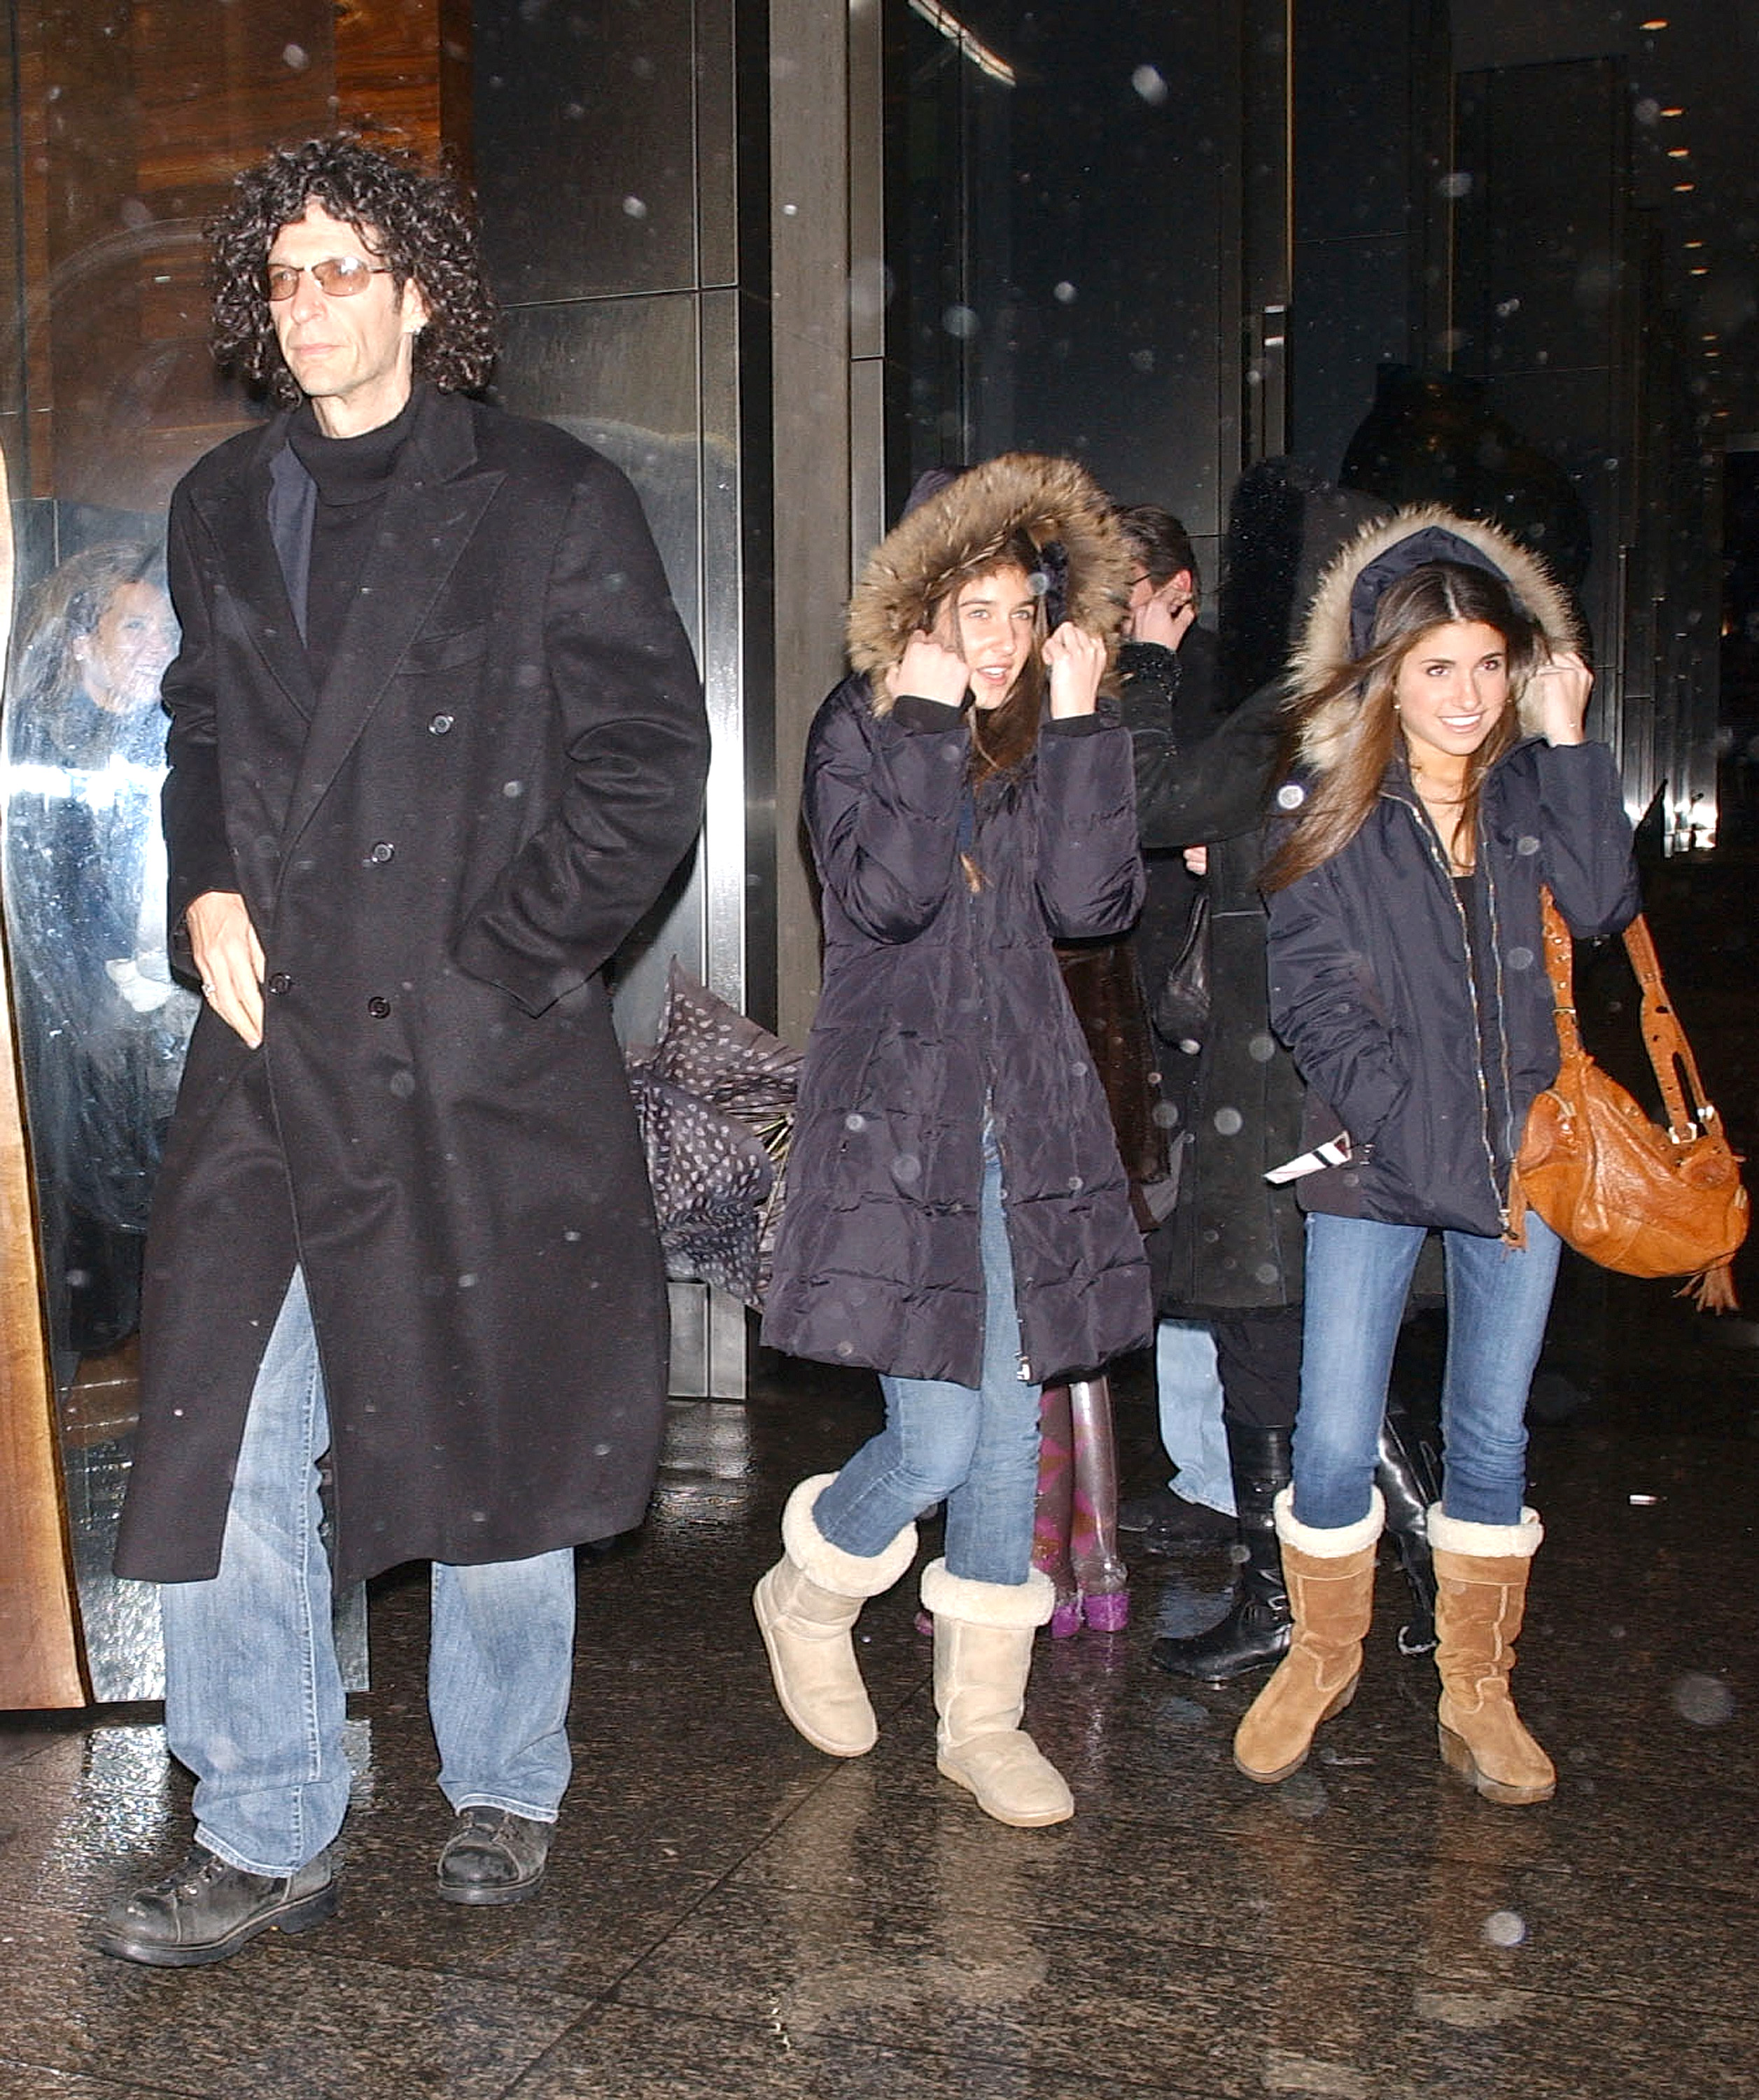 Howard Stern with his daughters Ashley and Debra Stern leaves a midtown restaurant on March 16, 2007, in New York City | Source: Getty Images